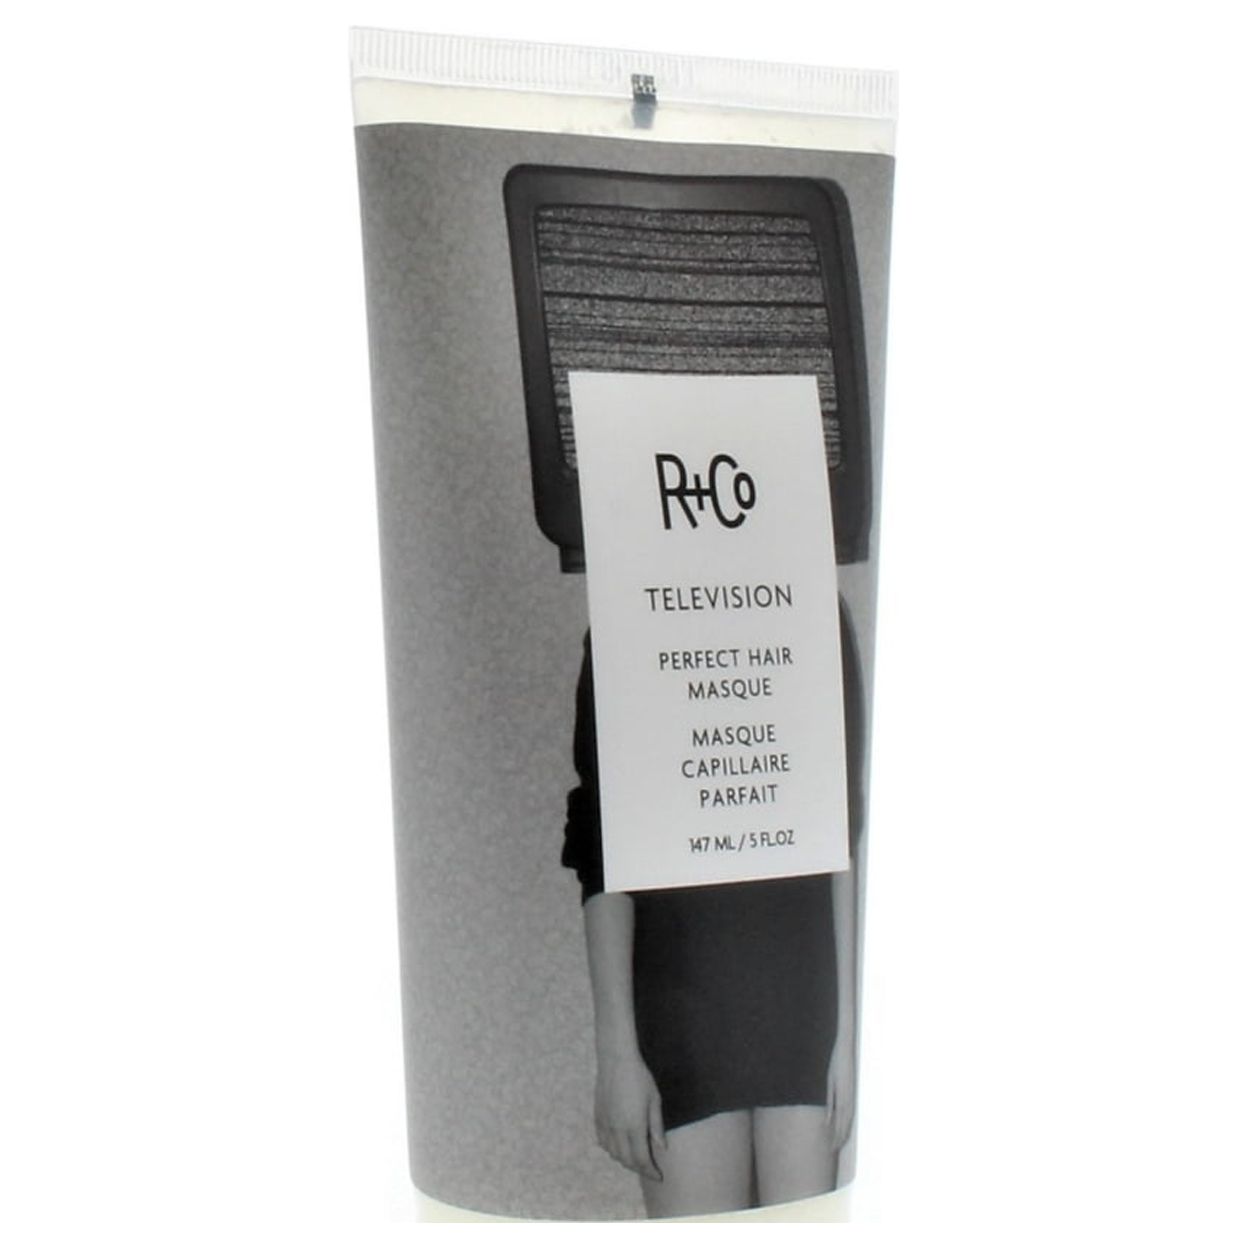 R+Co Television Perfect Hair Masque, 5 oz Masque - image 2 of 3